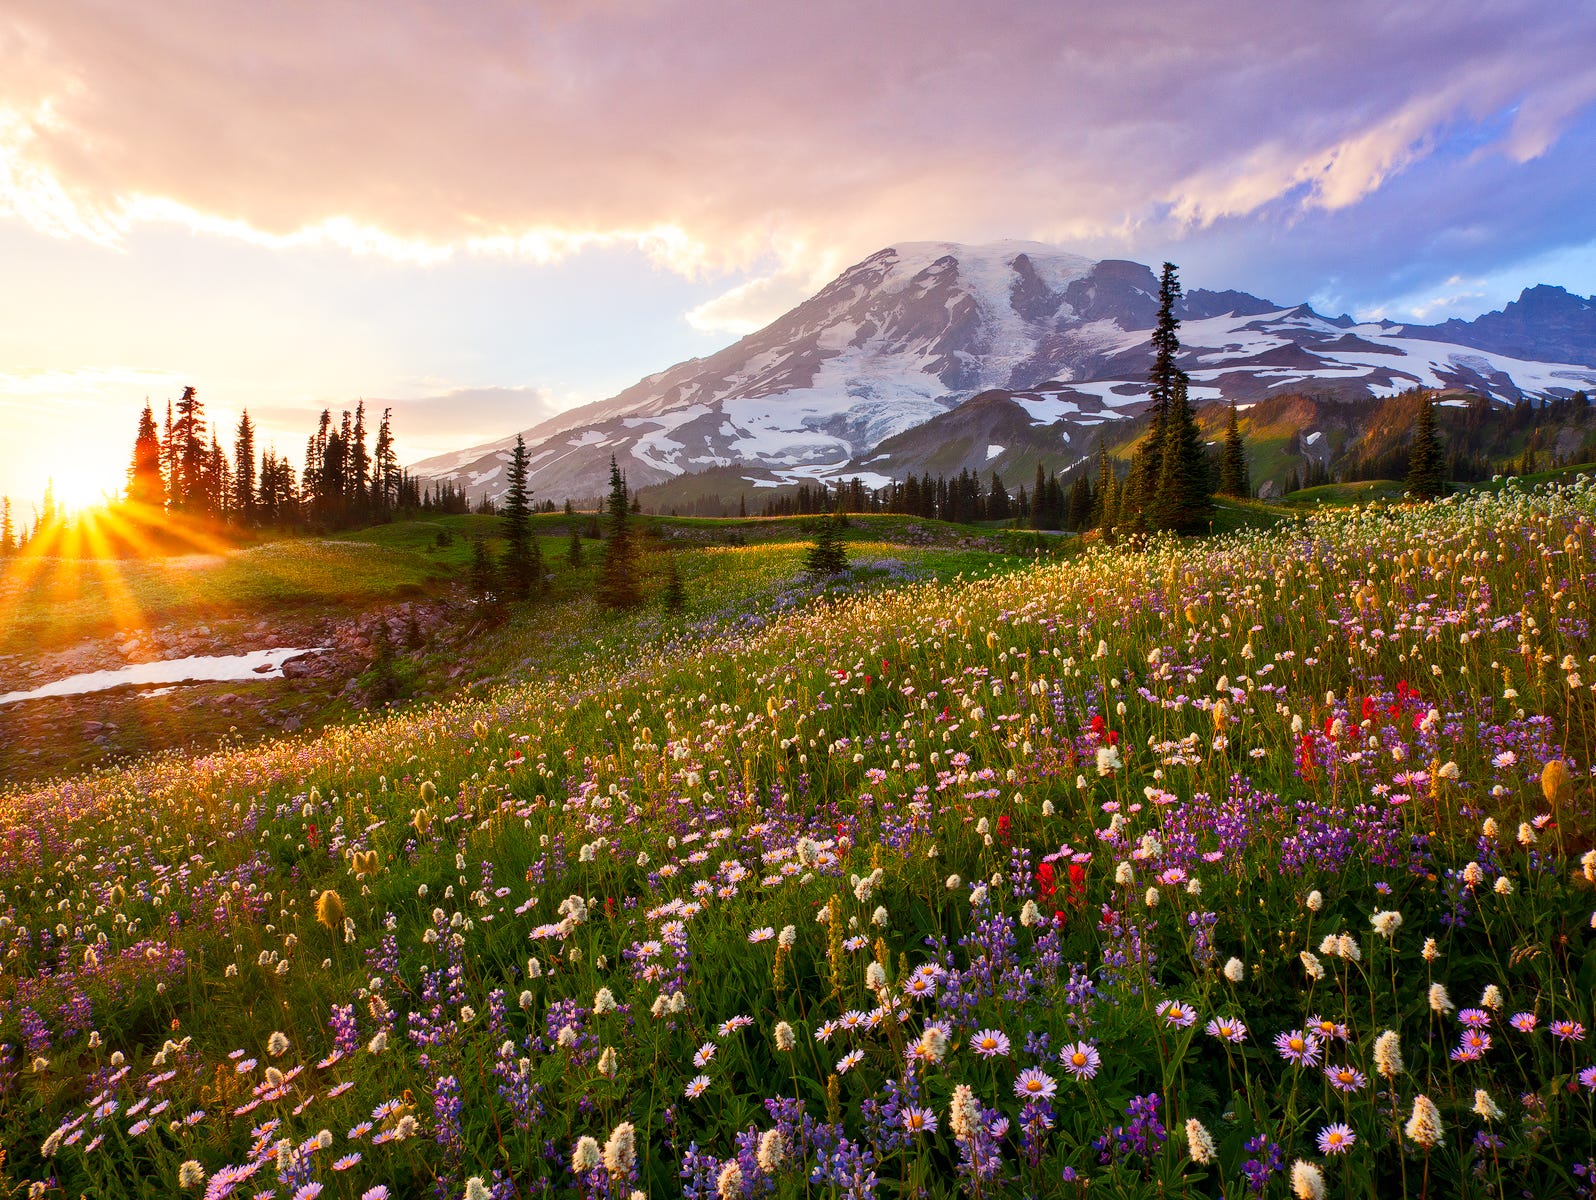 Mount Rainier National Park's Paradise area is famous for its glorious views and wildflower meadows